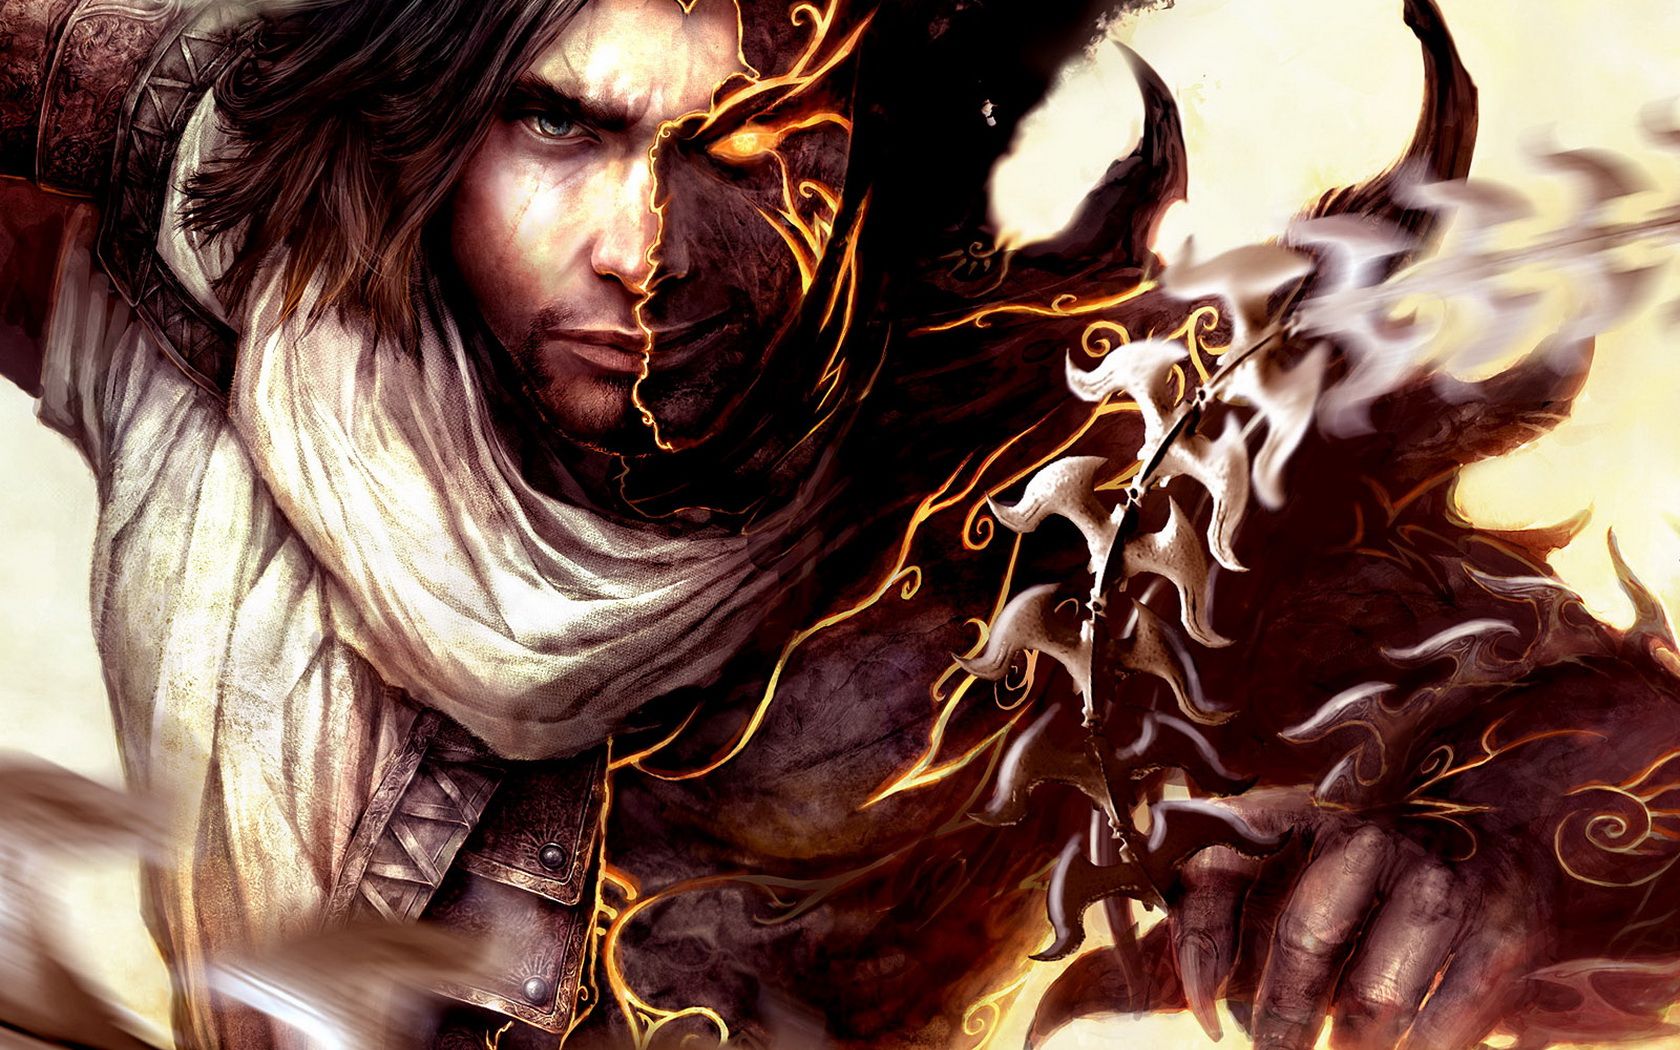 prince of persia: the two thrones, prince of persia, video game